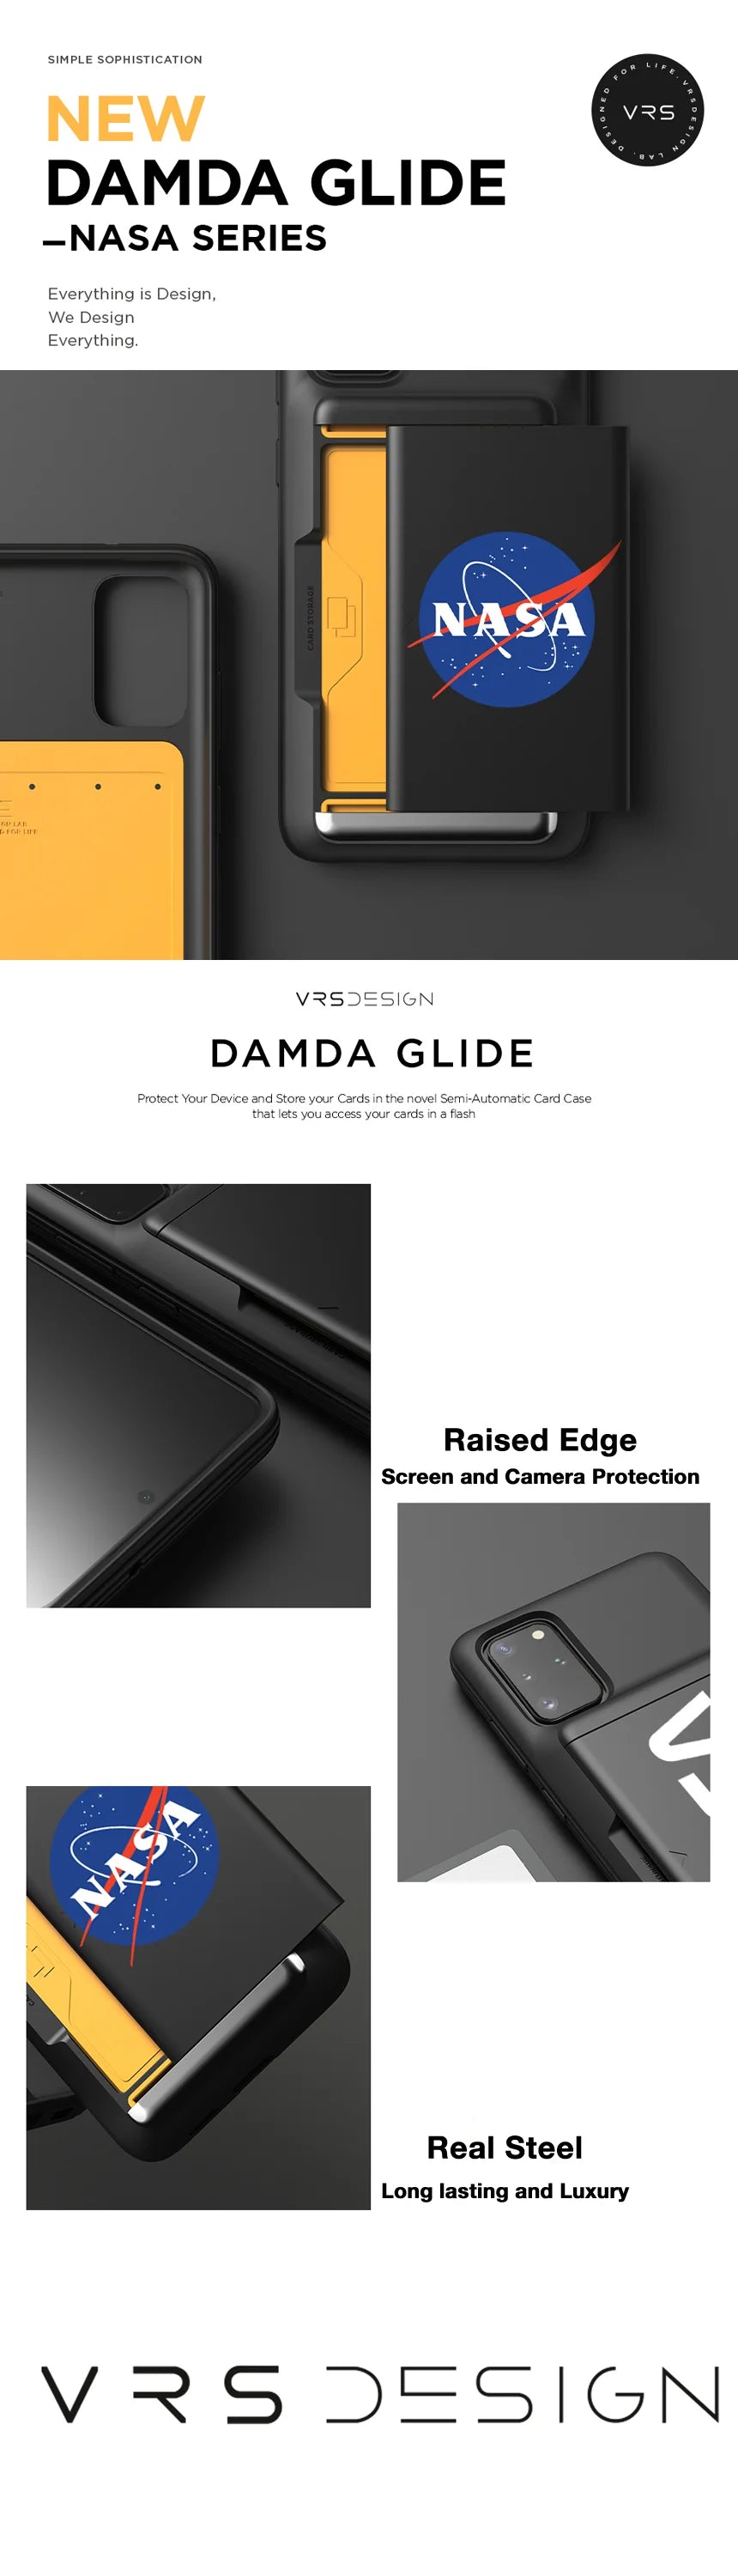 iPhone 11 Pro Case Damda Glide Shield NASA High quality TPU material for extreme drop protection with shockproof Convenient compartment for up to 2 cards and some cash.